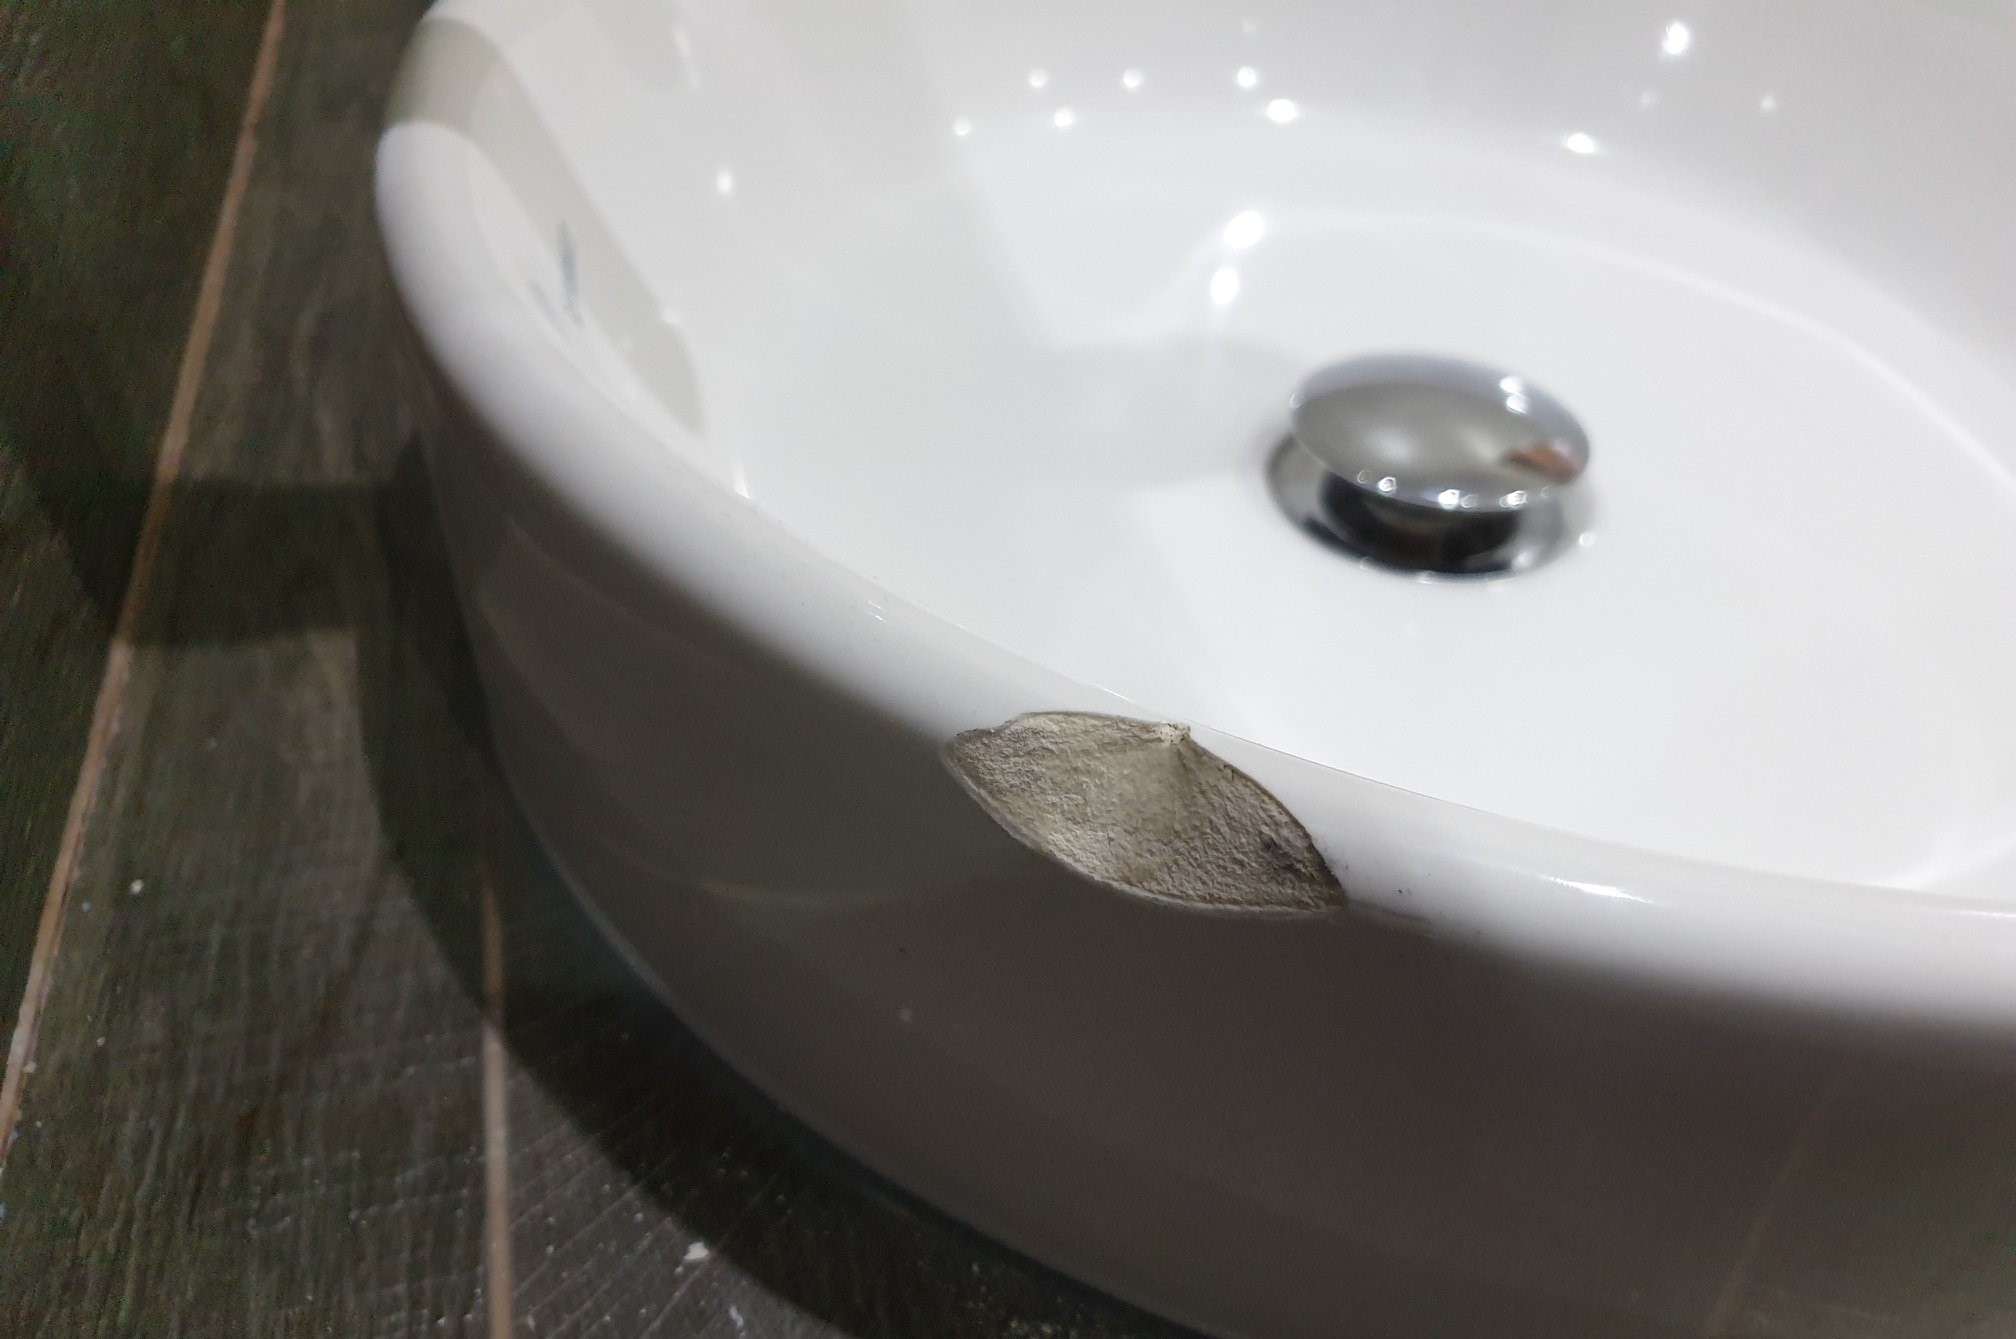 repair chipped porcelain kitchen sink